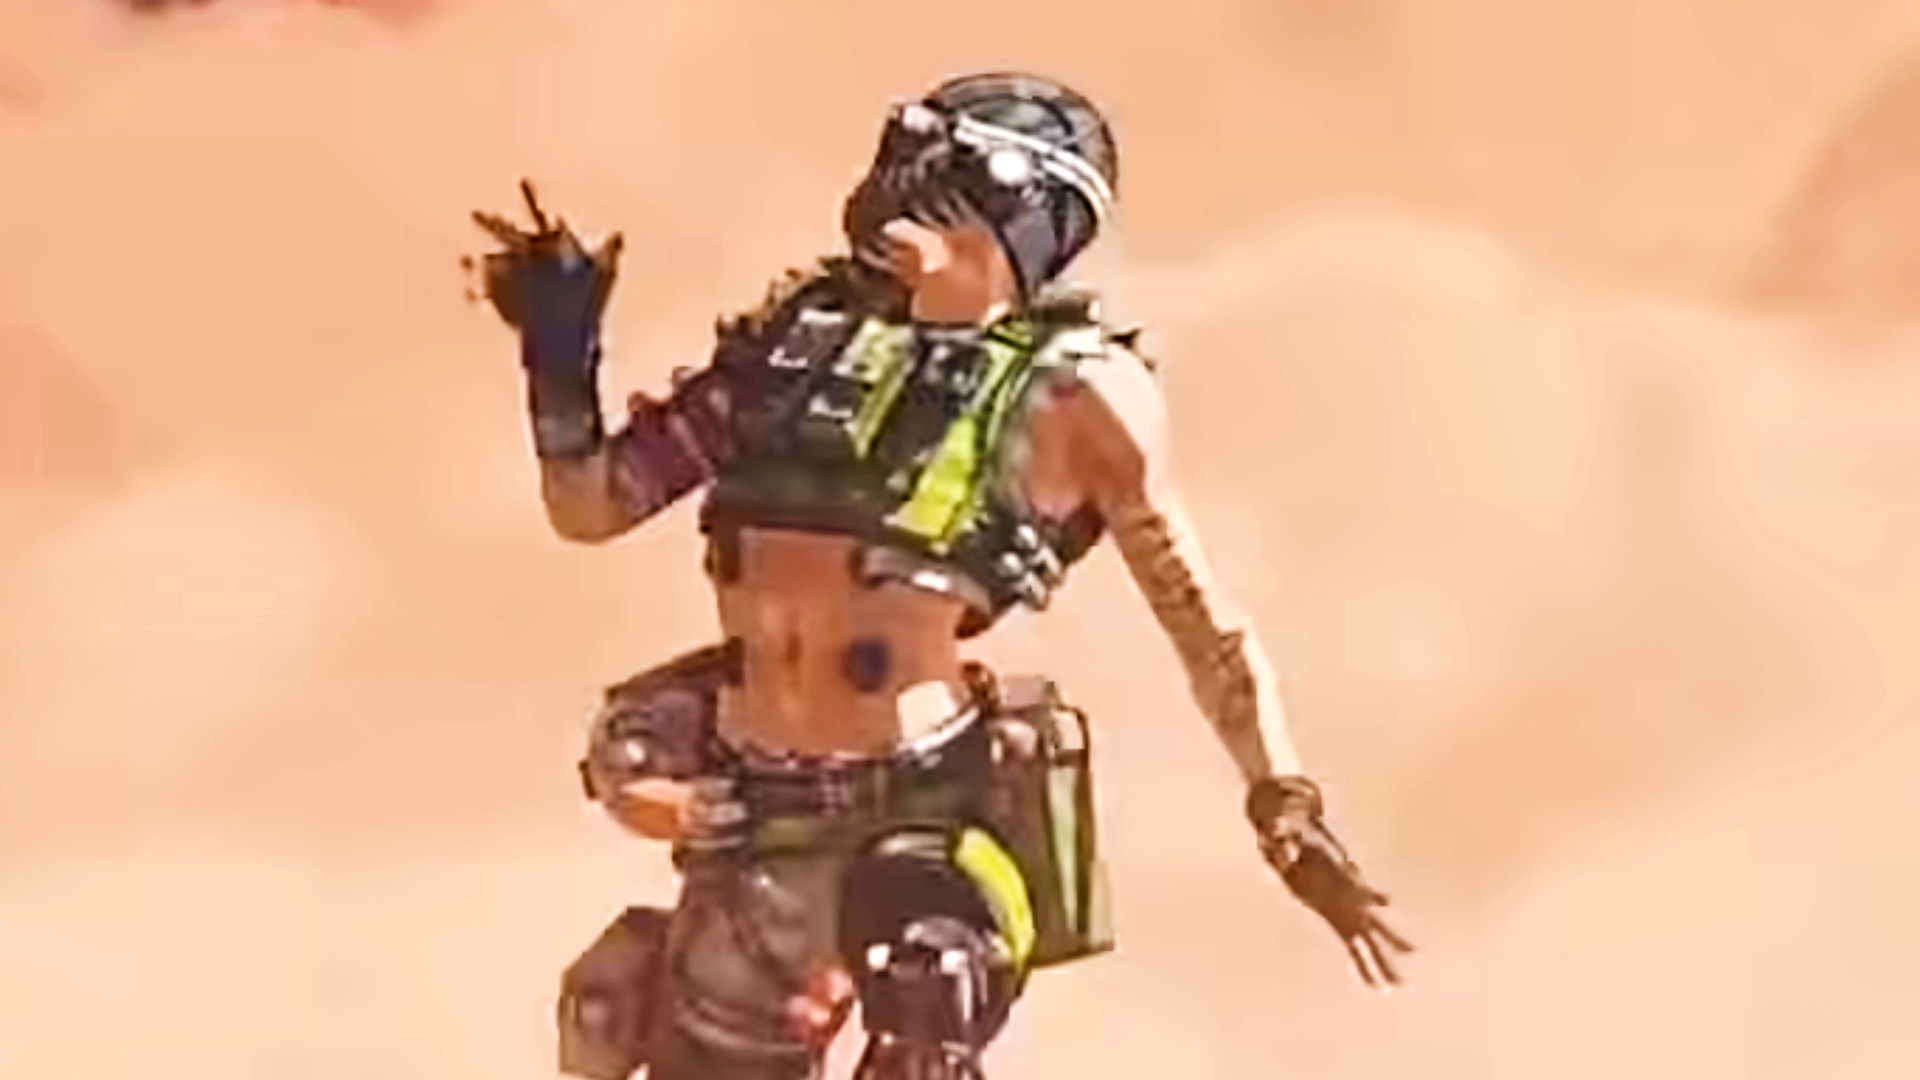 Apex Legends players request respite from relentless Ring in season 14